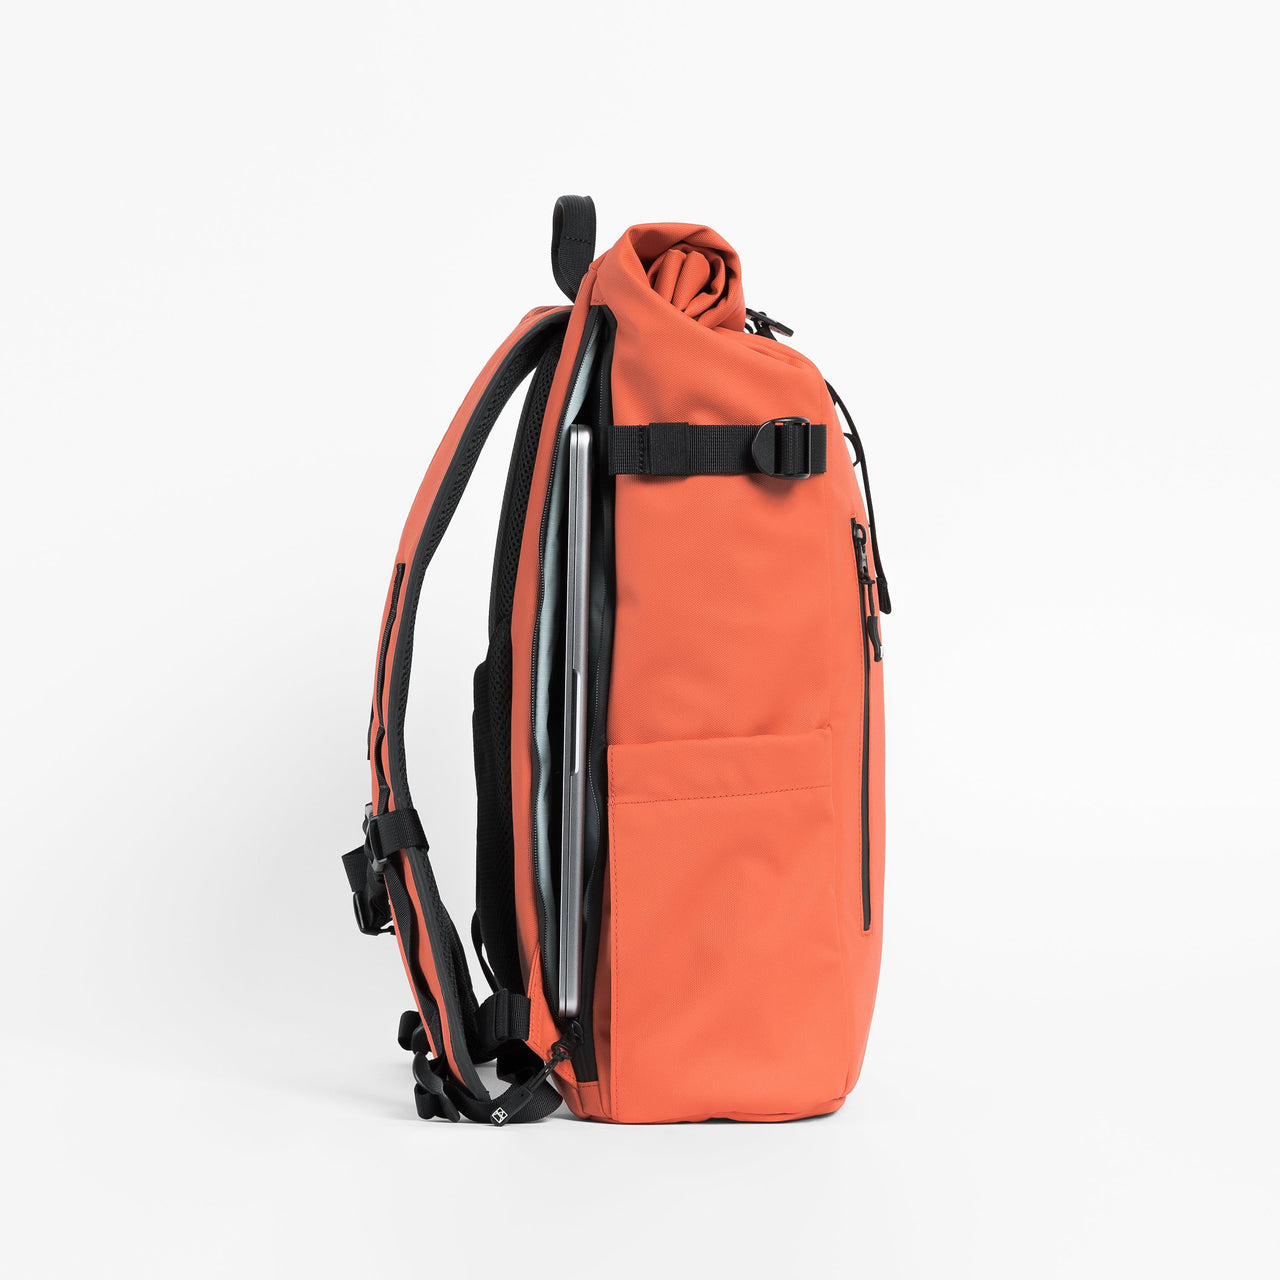 Side view of The Roll Top 20L backpack in Ember Orange with laptop compartment